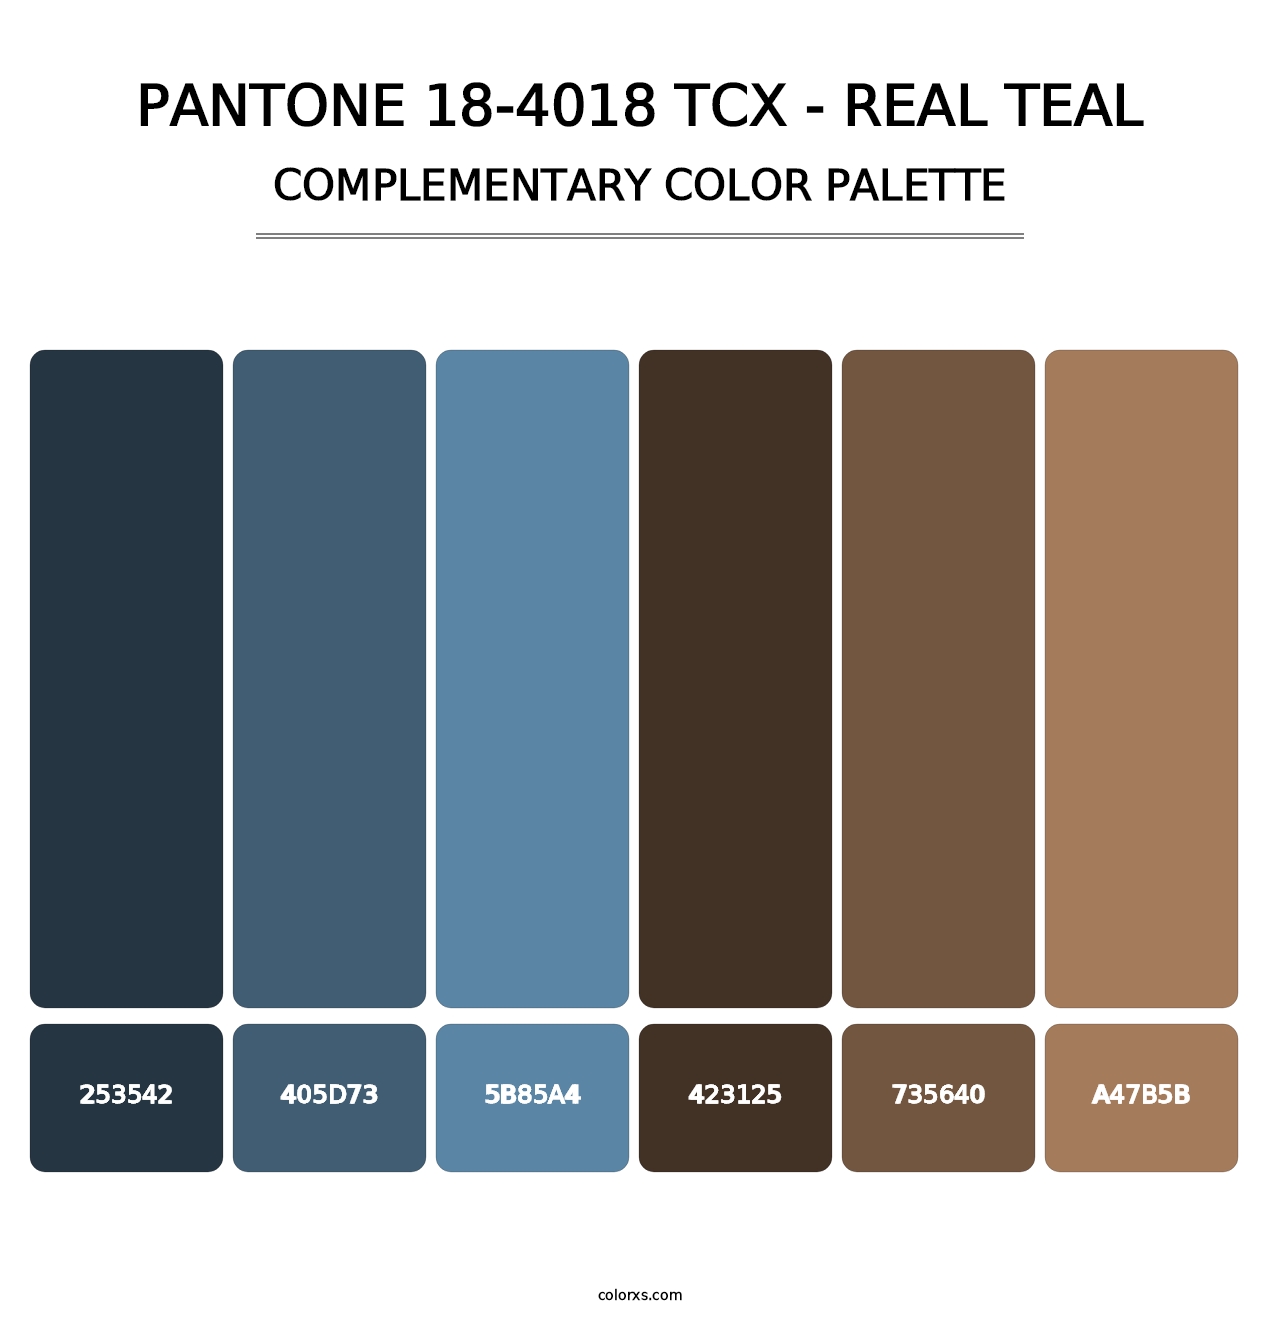 PANTONE 18-4018 TCX - Real Teal - Complementary Color Palette